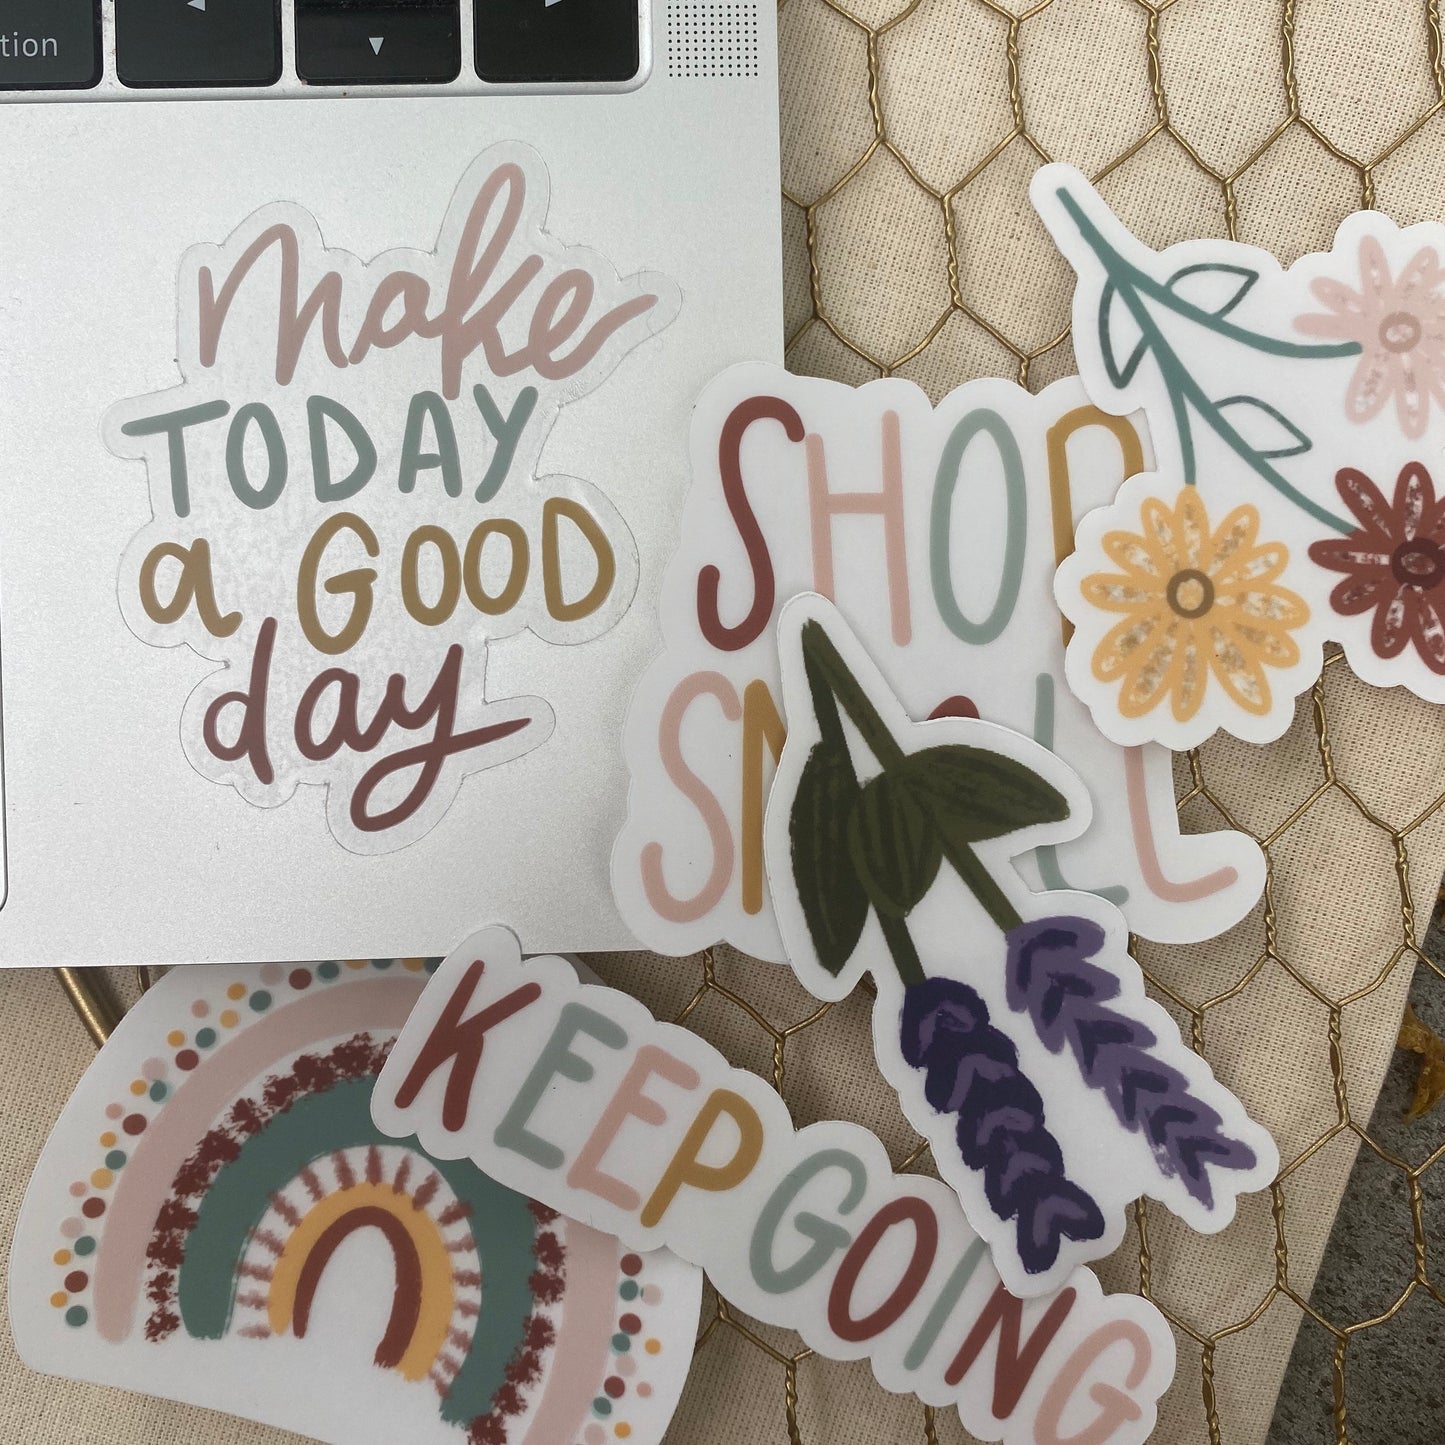 CLEAR Make Today a Good Day Sticker